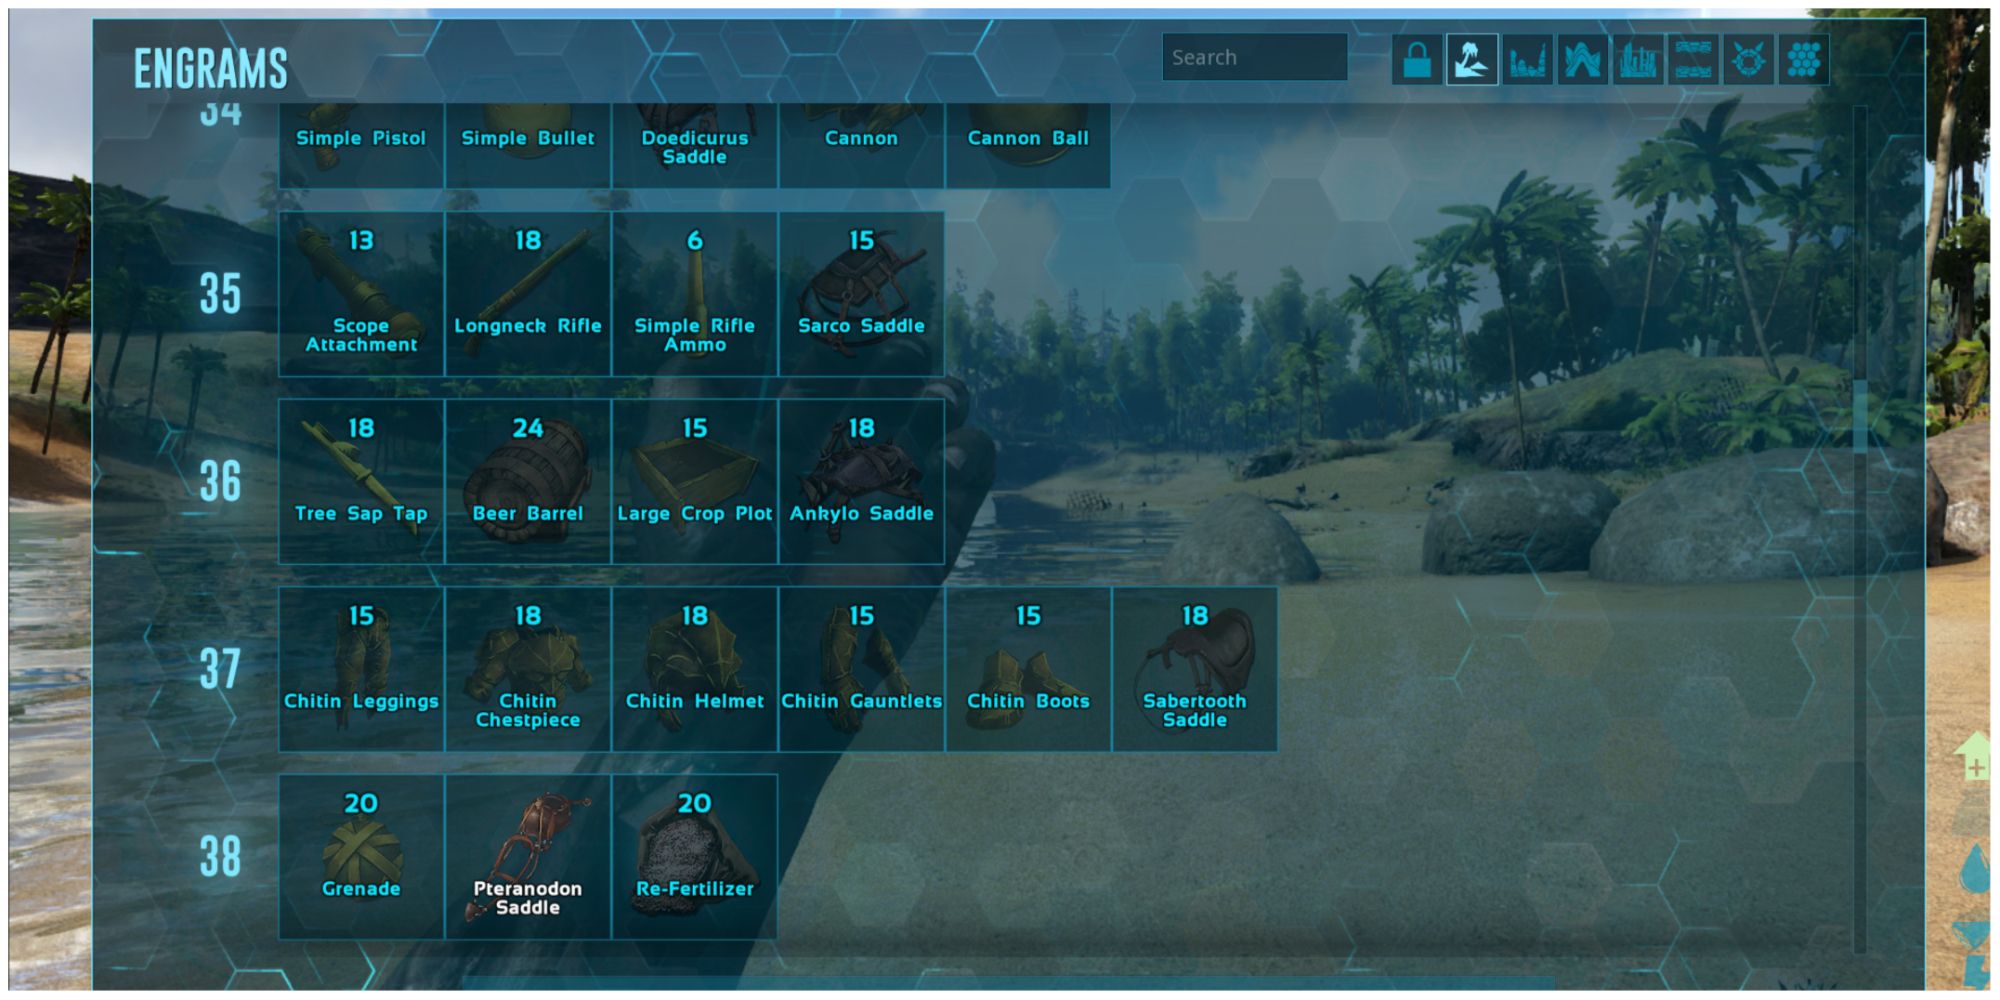 ARK Survival Evolved engrams screen showing tiers 35, 36, 37 & 38